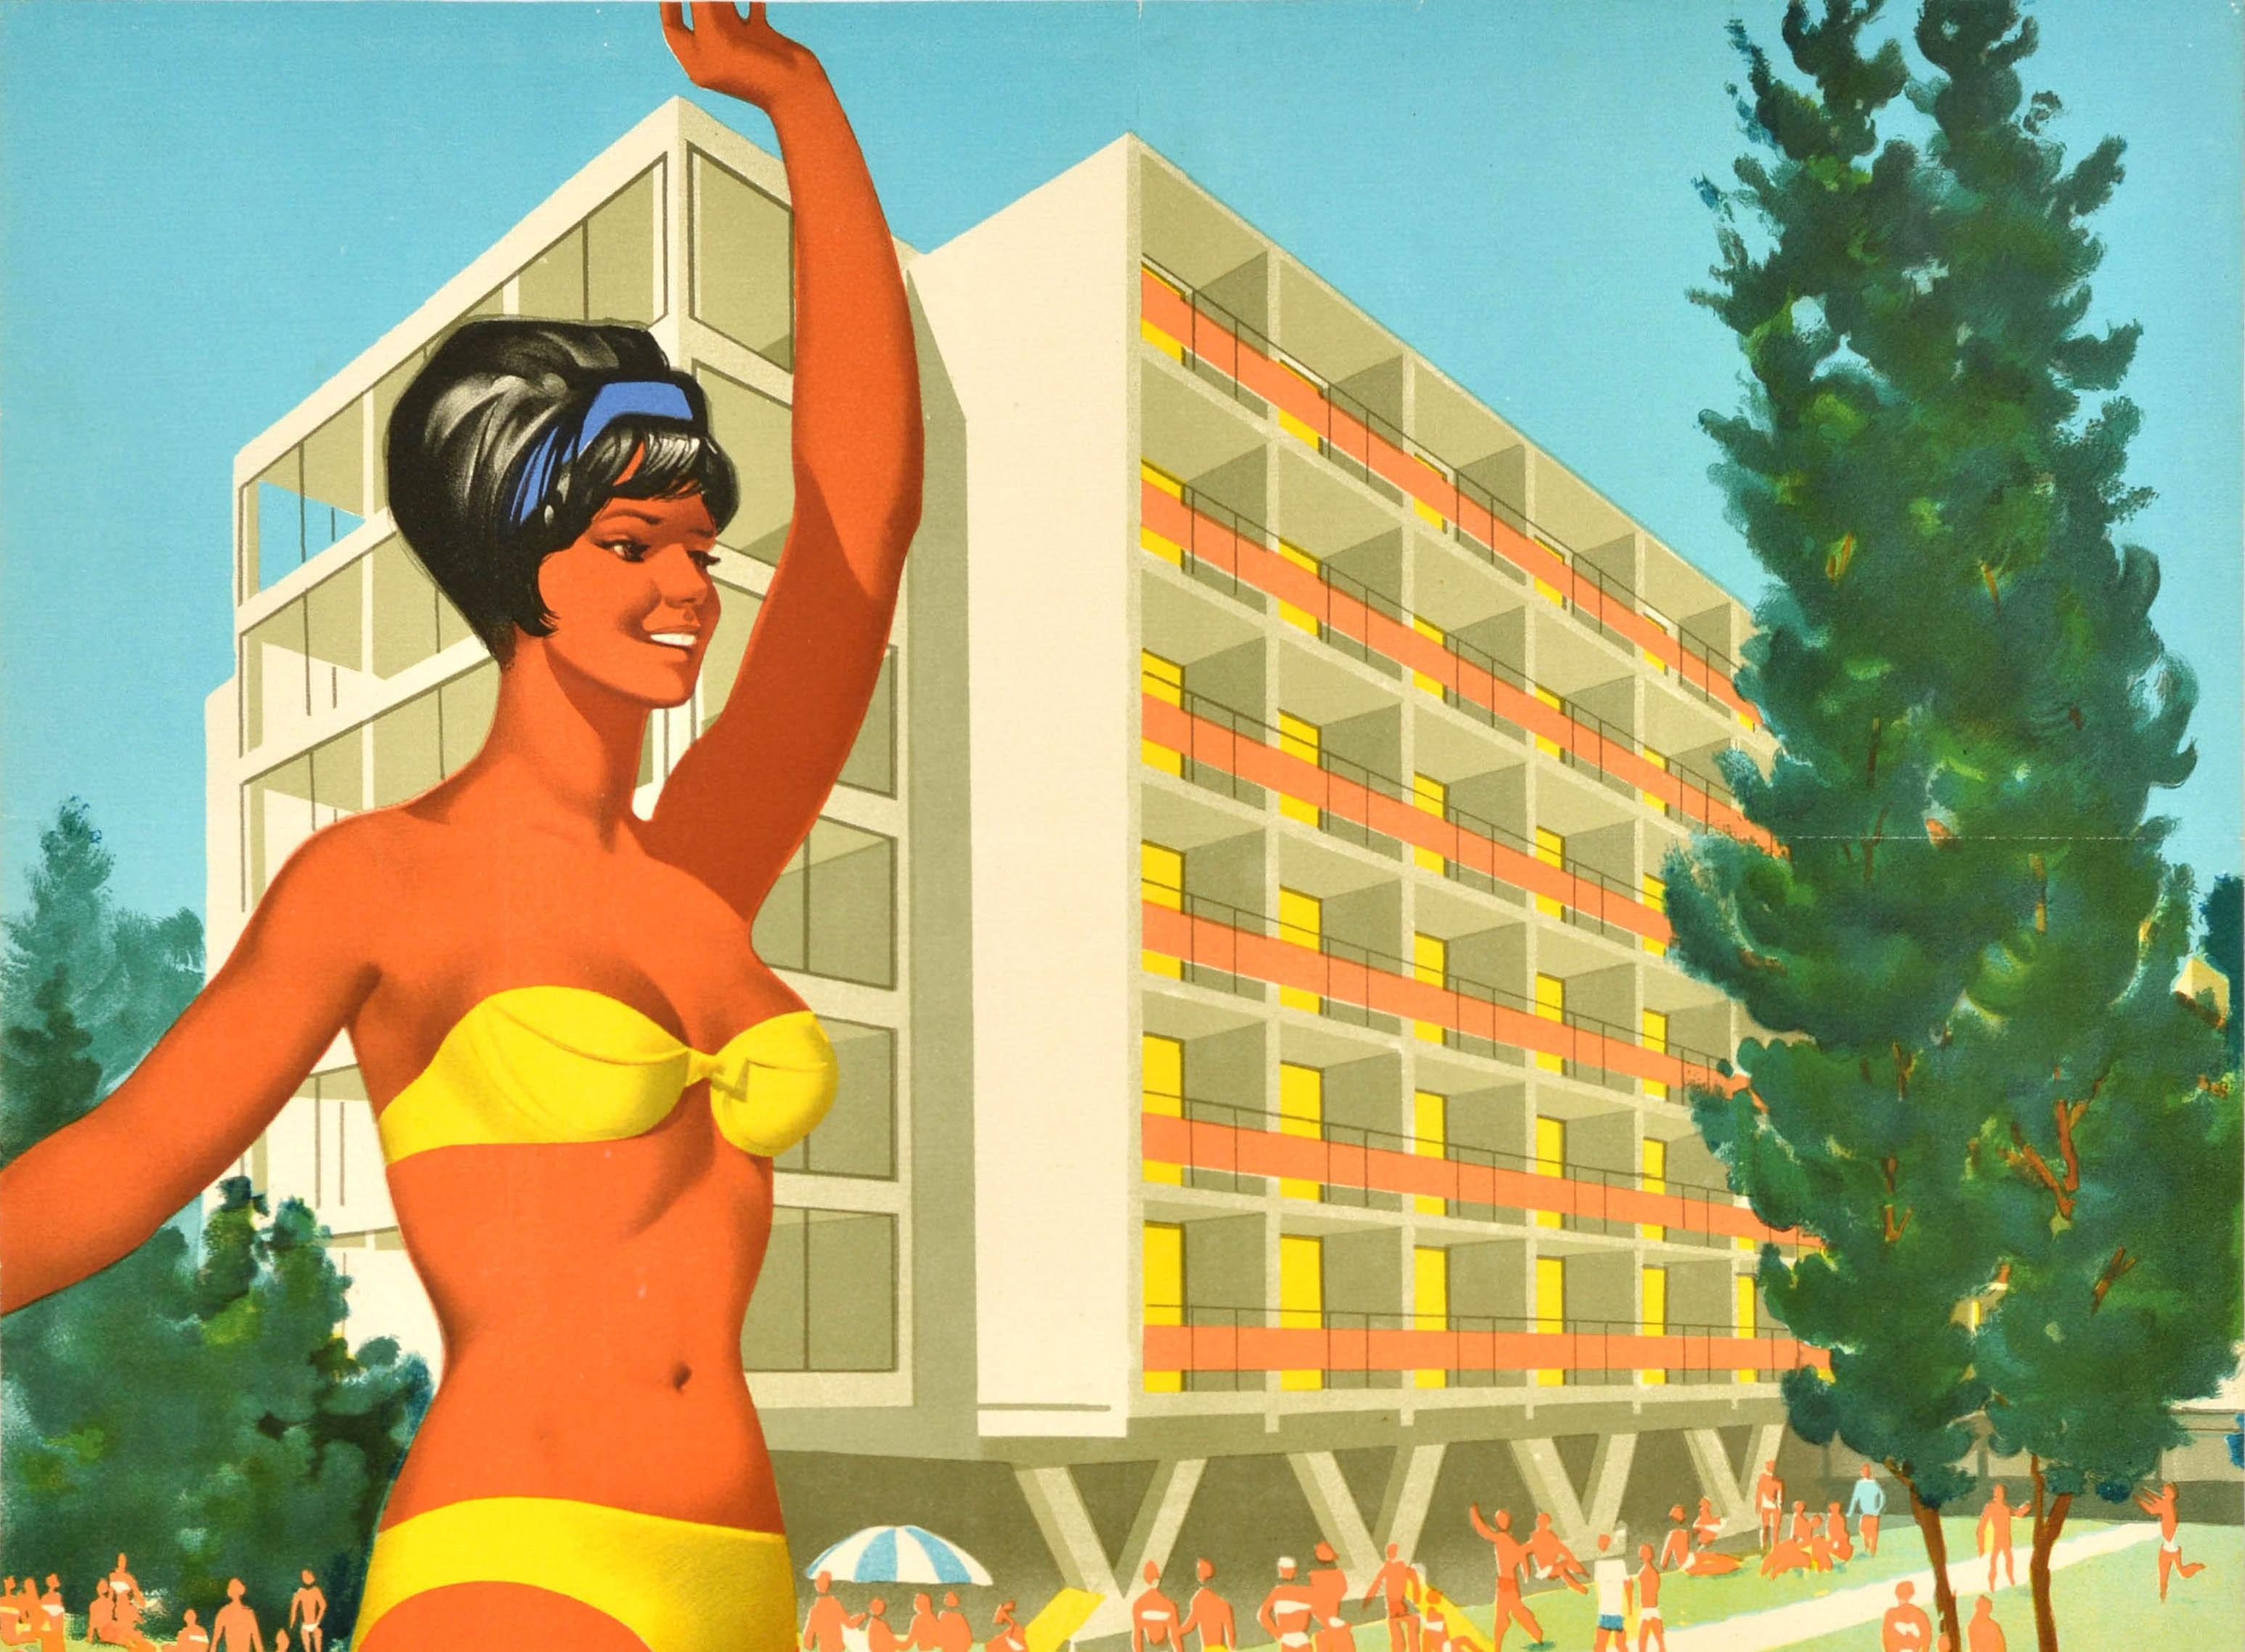 Original vintage travel poster for the resort area of Balaton The New Holiday Paradise / Balaton Det Nya Semesterparadiset featuring a colourful illustration of a smiling lady in a yellow bikini swimsuit standing in the water with tourists